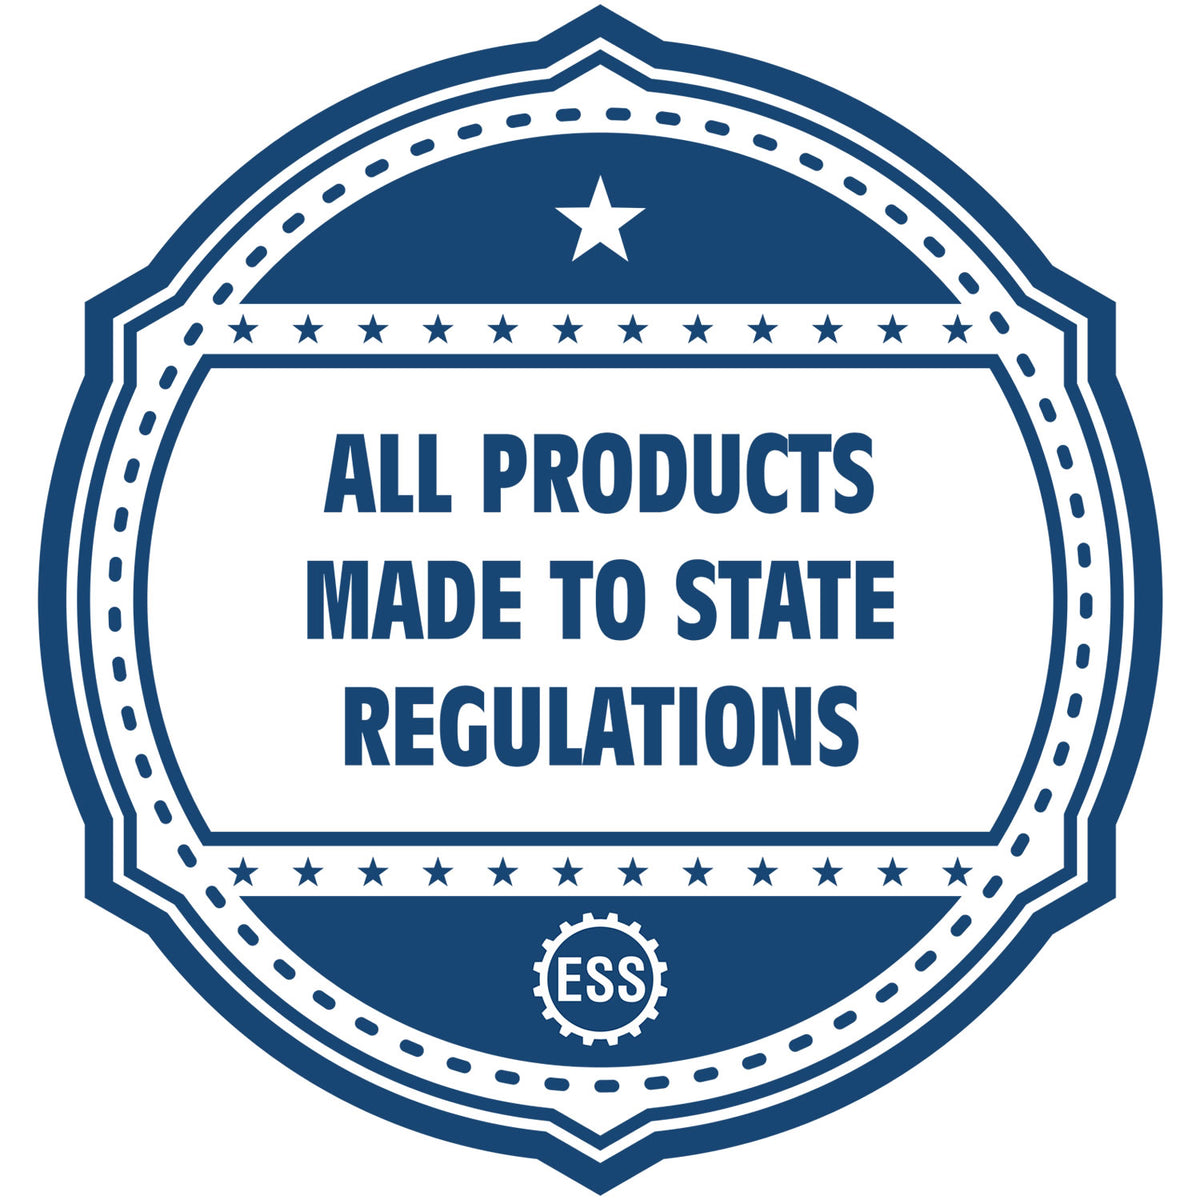 An icon or badge element for the Soft Pocket Louisiana Landscape Architect Embosser showing that this product is made in compliance with state regulations.